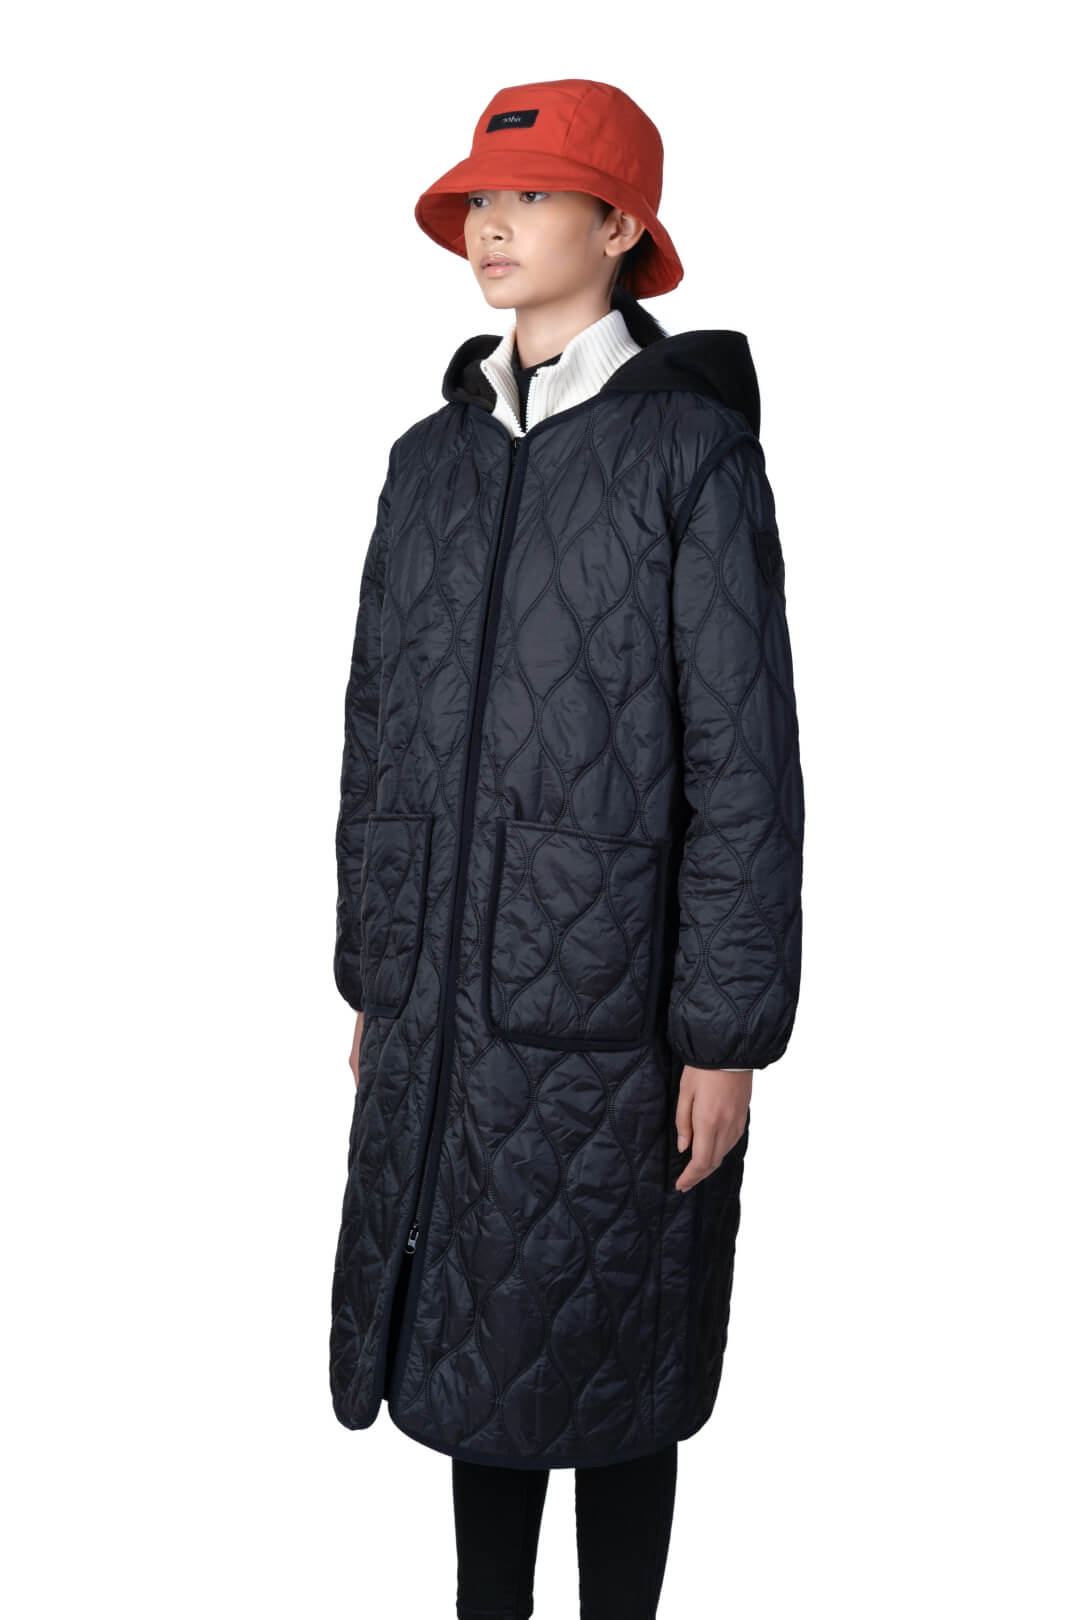 Lunar New Year Ladies Quilted Long Jacket in knee length, sustainable and environmentally friendly Primaloft Gold Insulation Active+, with removable fleece hood, two-way front zipper, two waist patch pockets, and diamond quilted body, in Black